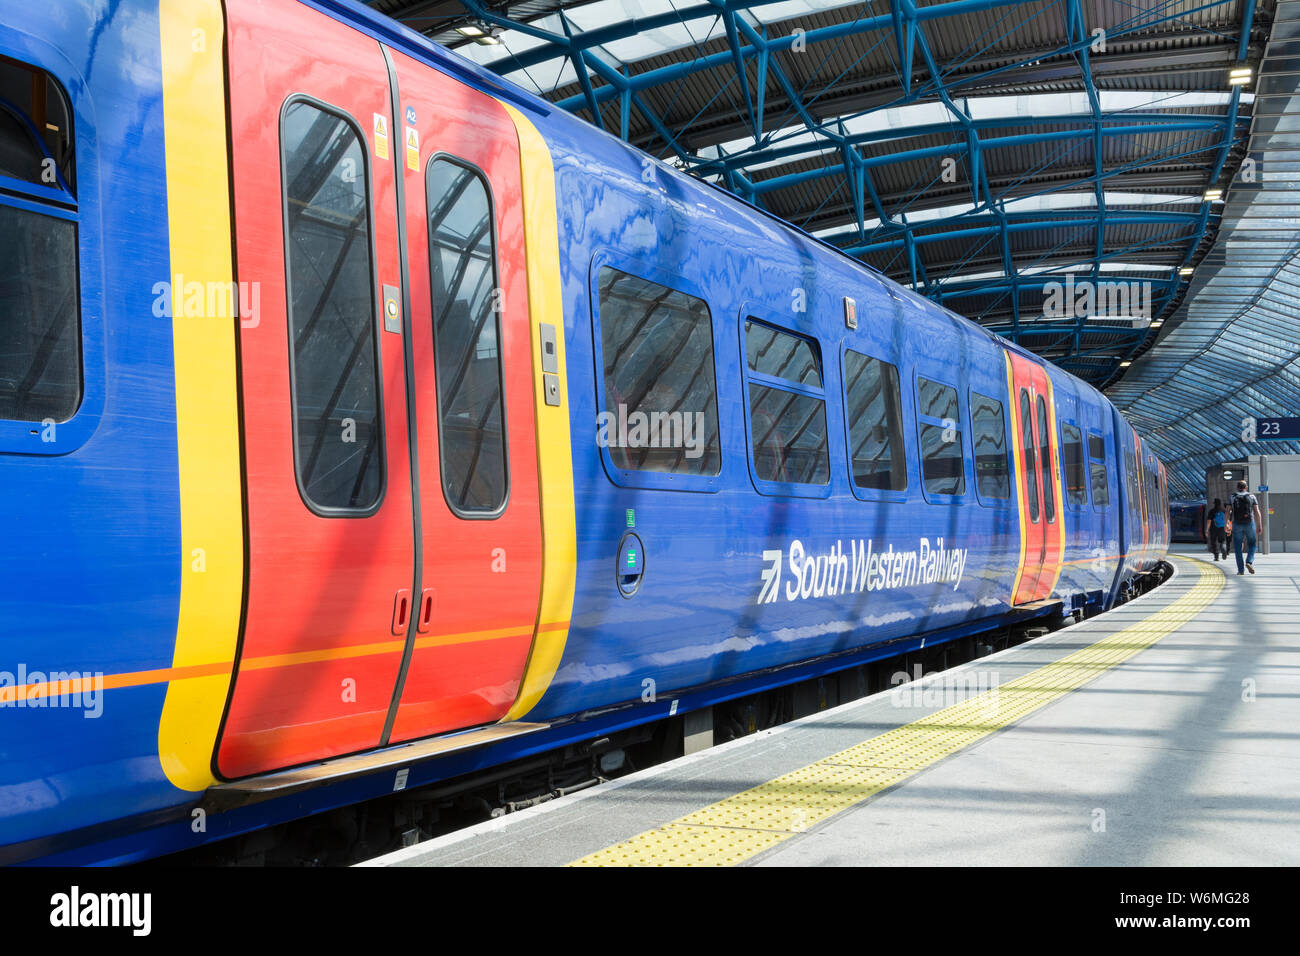 South Western Railway train carriage at Waterloo Station, London, UK Stock Photo